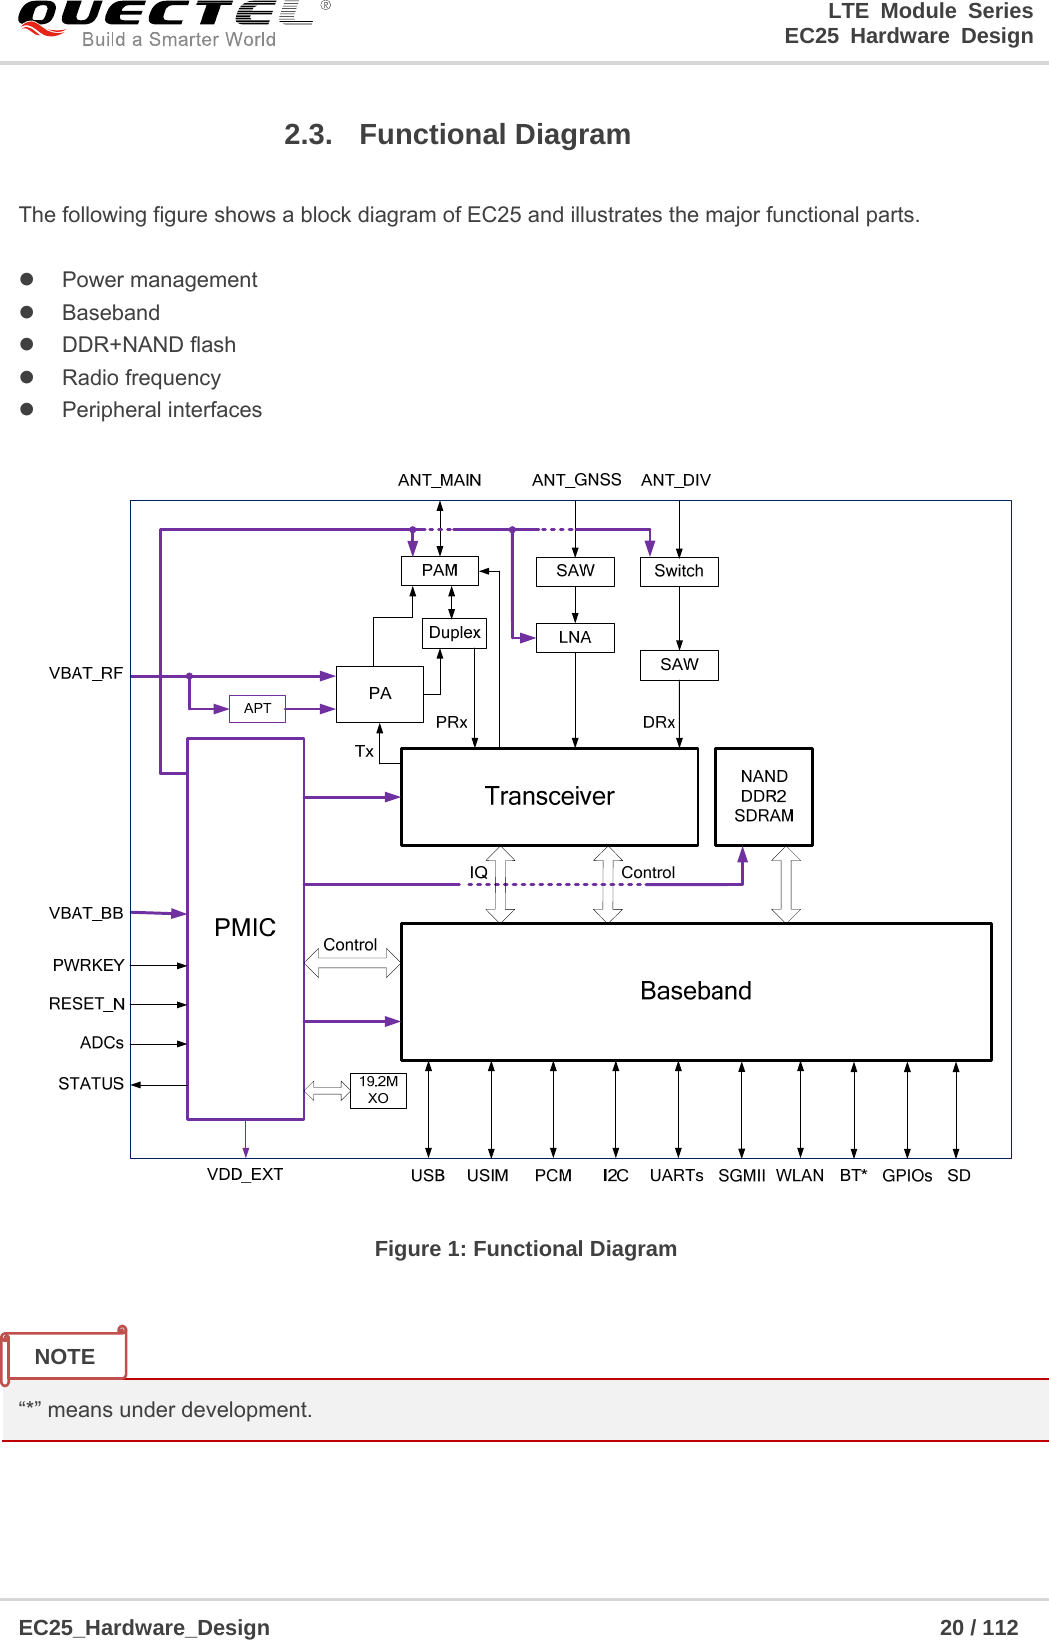 LTE Module Series                                                  EC25 Hardware Design  EC25_Hardware_Design                                                             20 / 112    2.3. Functional Diagram  The following figure shows a block diagram of EC25 and illustrates the major functional parts.     Power management  Baseband  DDR+NAND flash  Radio frequency   Peripheral interfaces  Figure 1: Functional Diagram   “*” means under development.  NOTE 